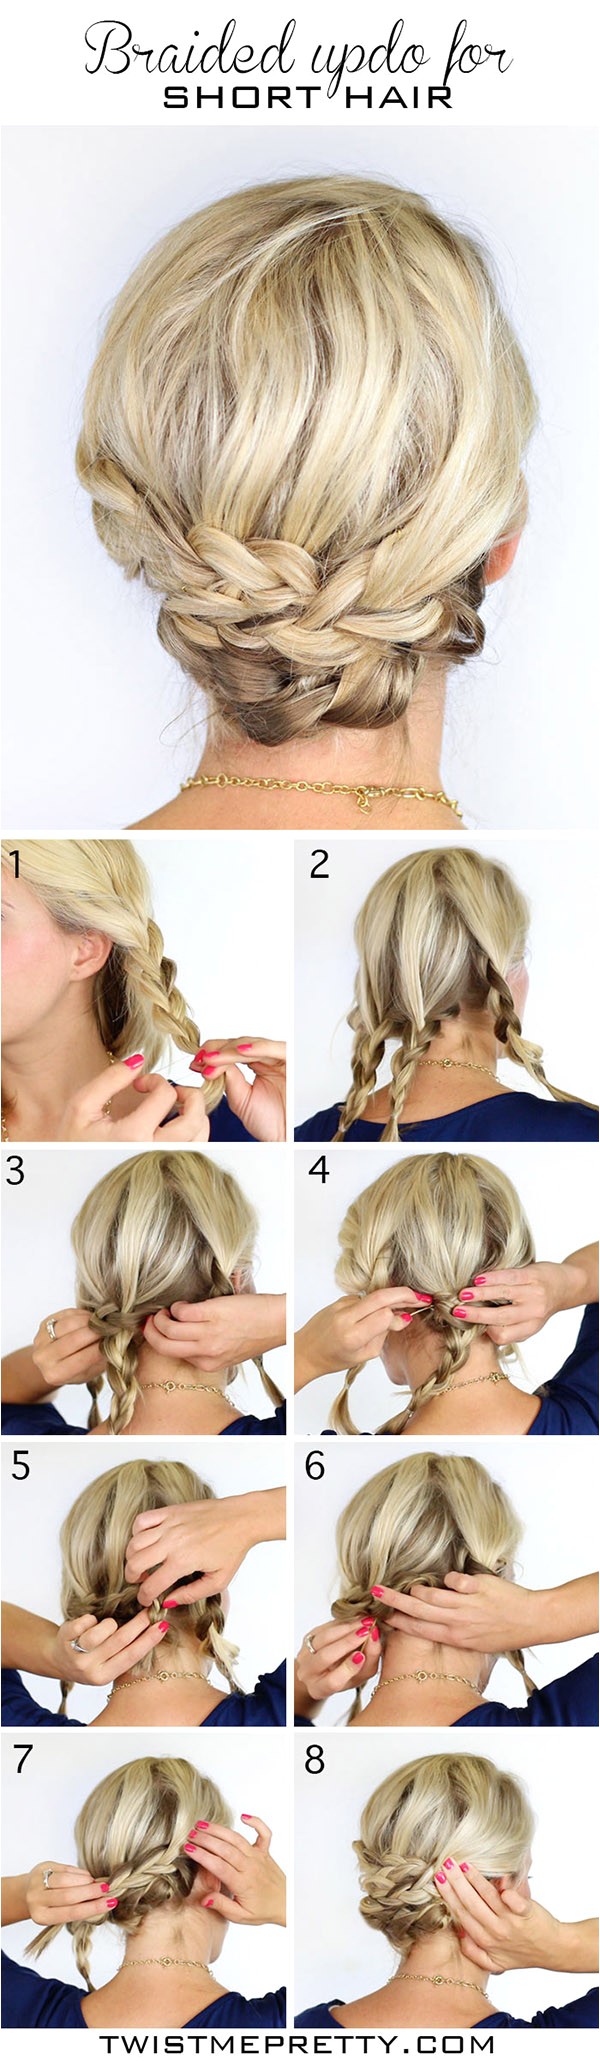 20 diy wedding hairstyles with tutorials to try on your own